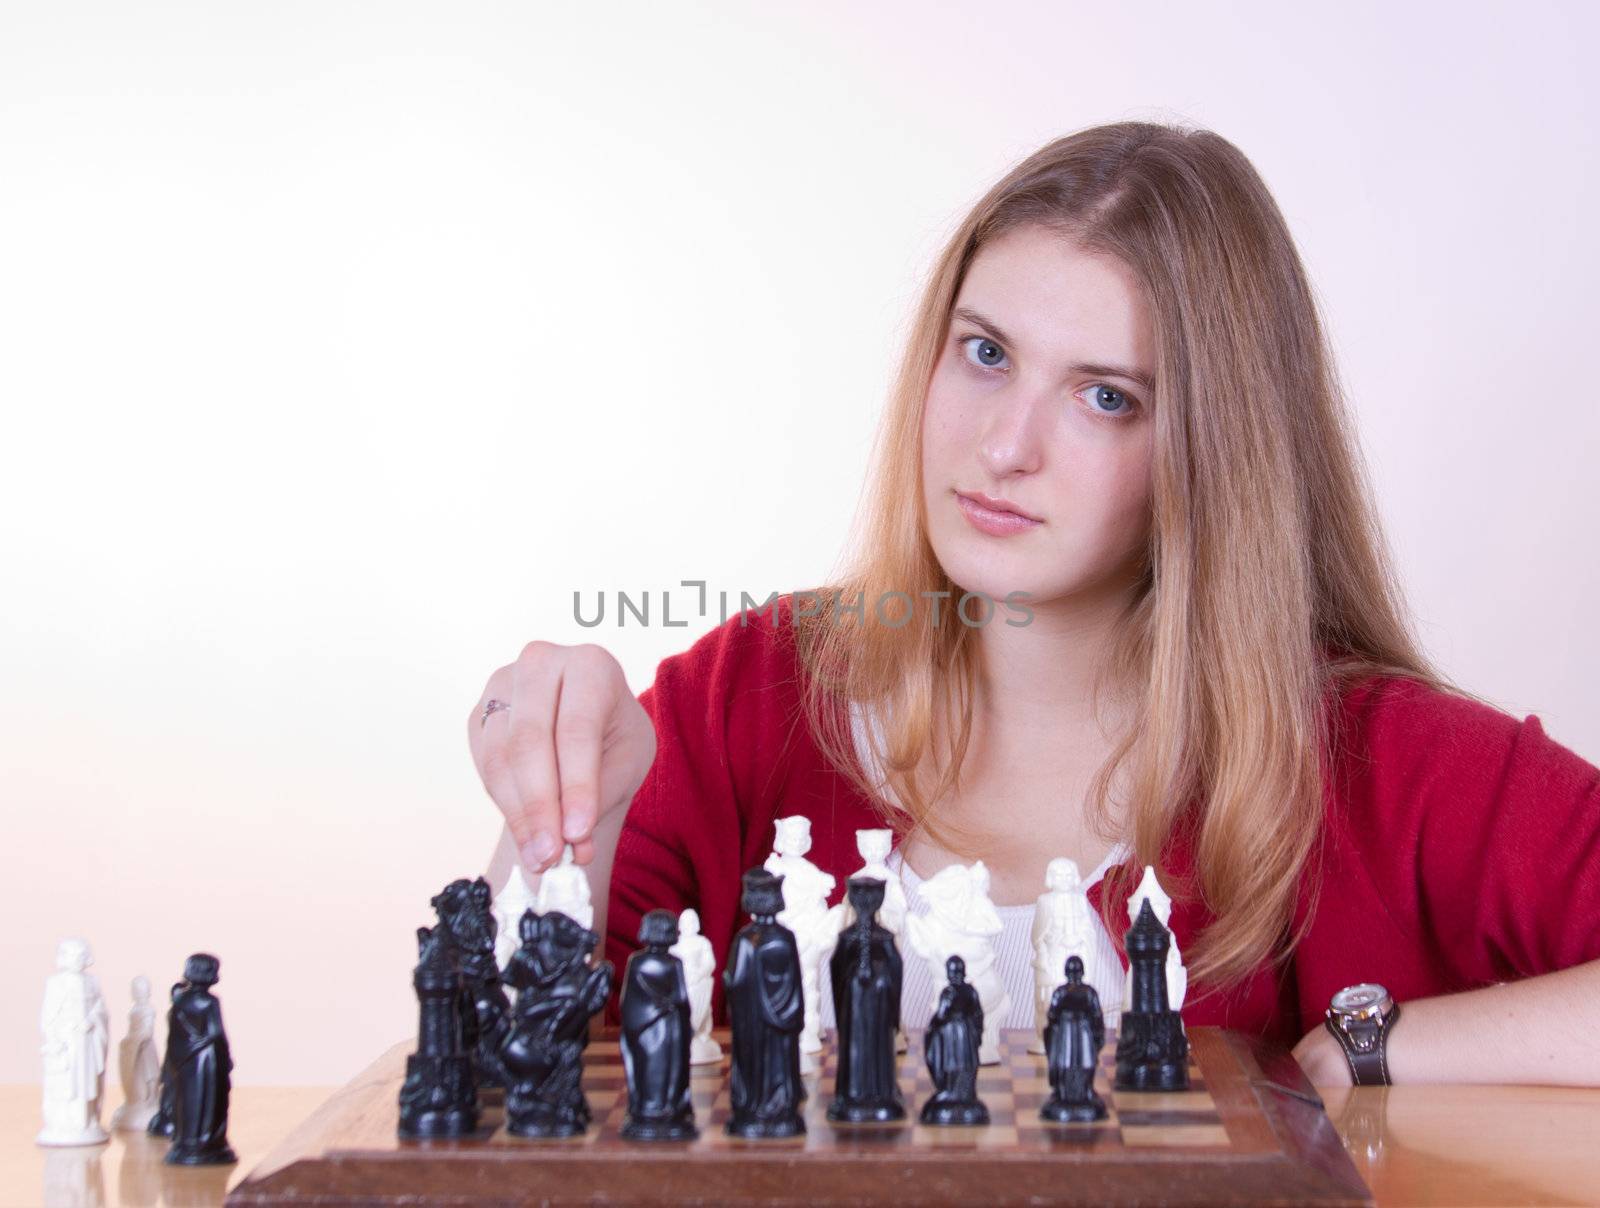 Pretty woman in red playing chess.